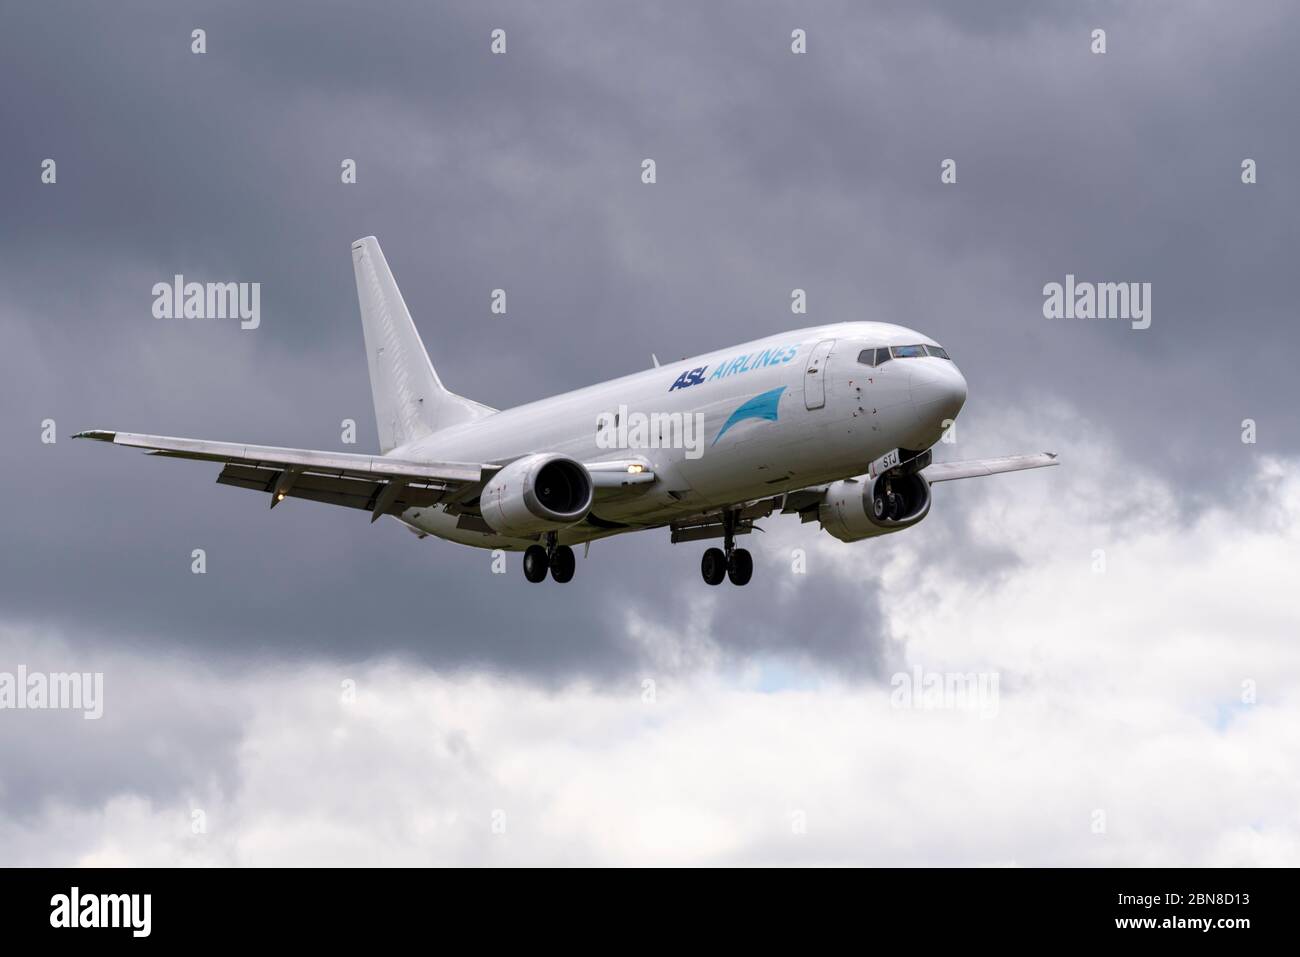 ASL Airlines Boeing 737 EI-STJ cargo jet plane arriving with freight for an Amazon warehouse landing at London Southend Airport UK in bad weather Stock Photo